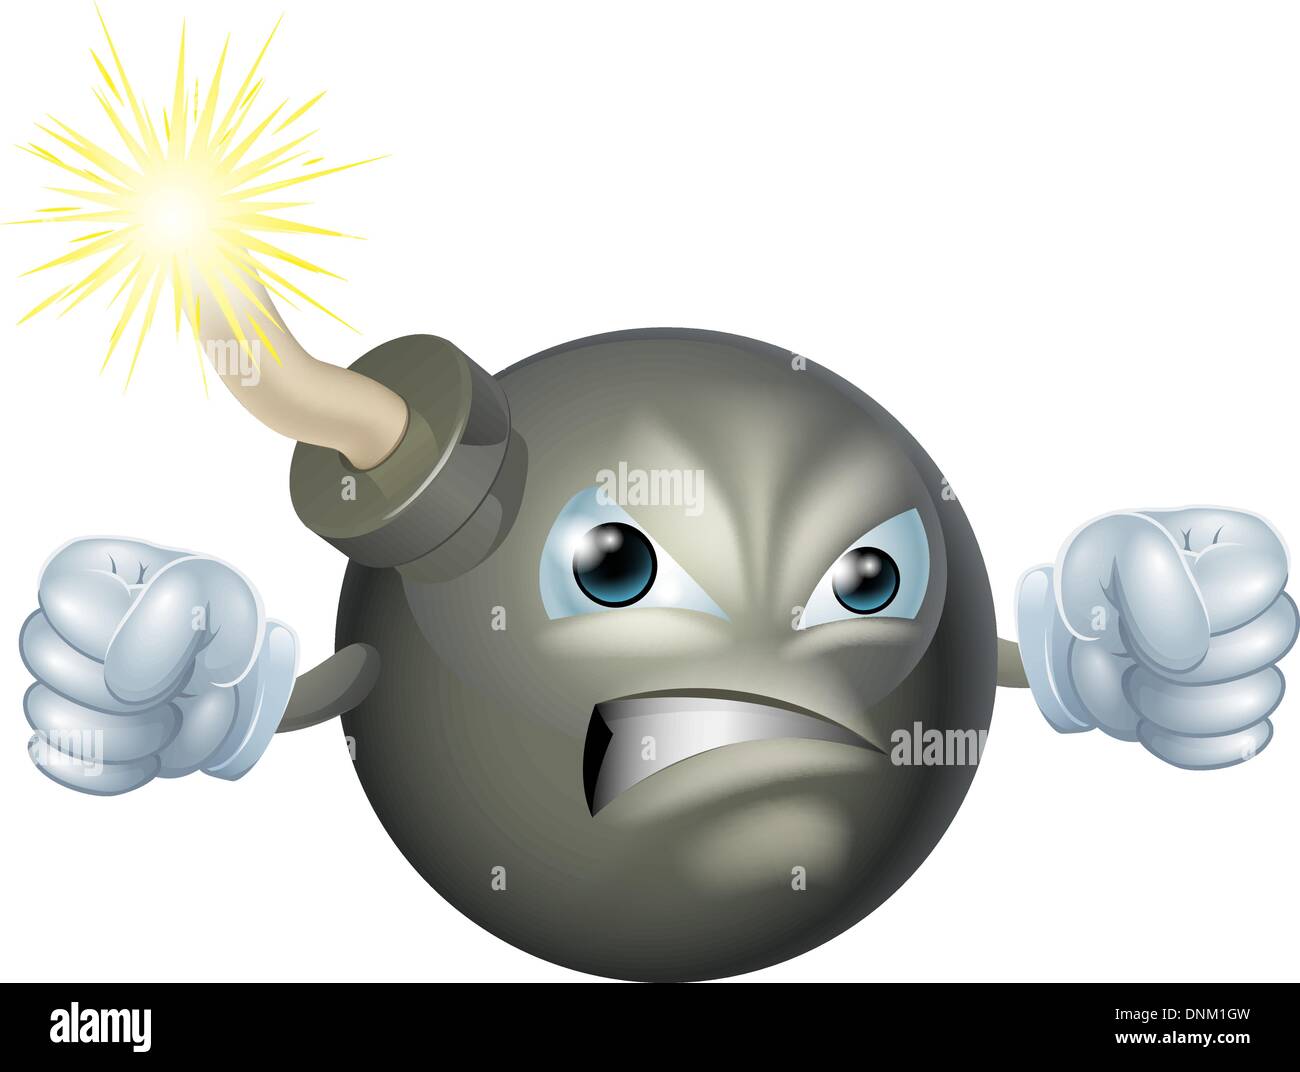 An illustration of an angry looking cartoon bomb character Stock Vector